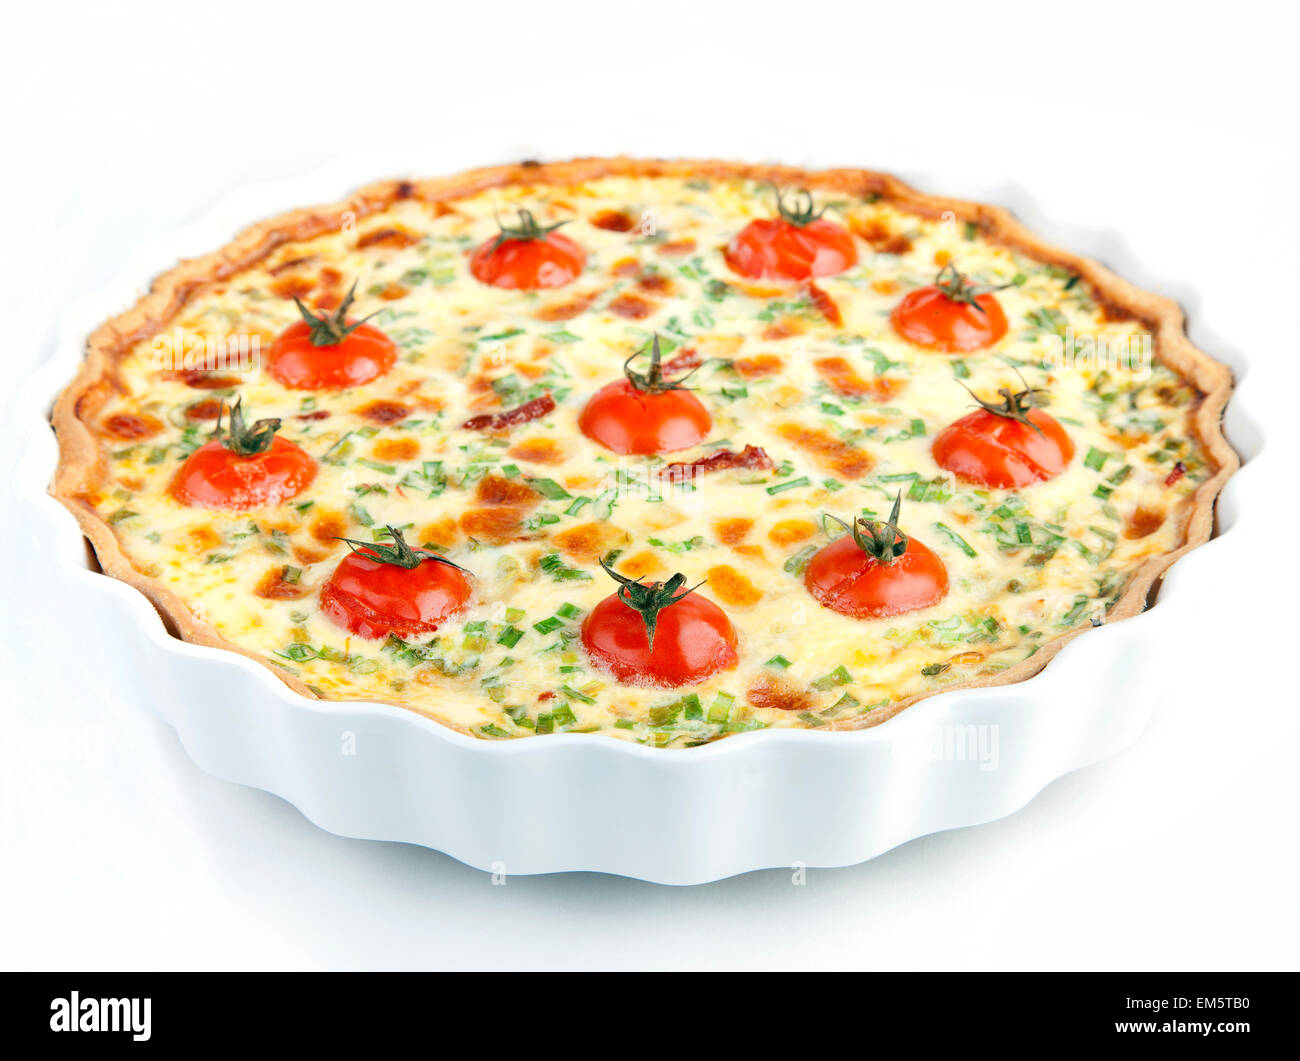 Quiche with cherry tomatoes and herbs on a white plate Stock Photo